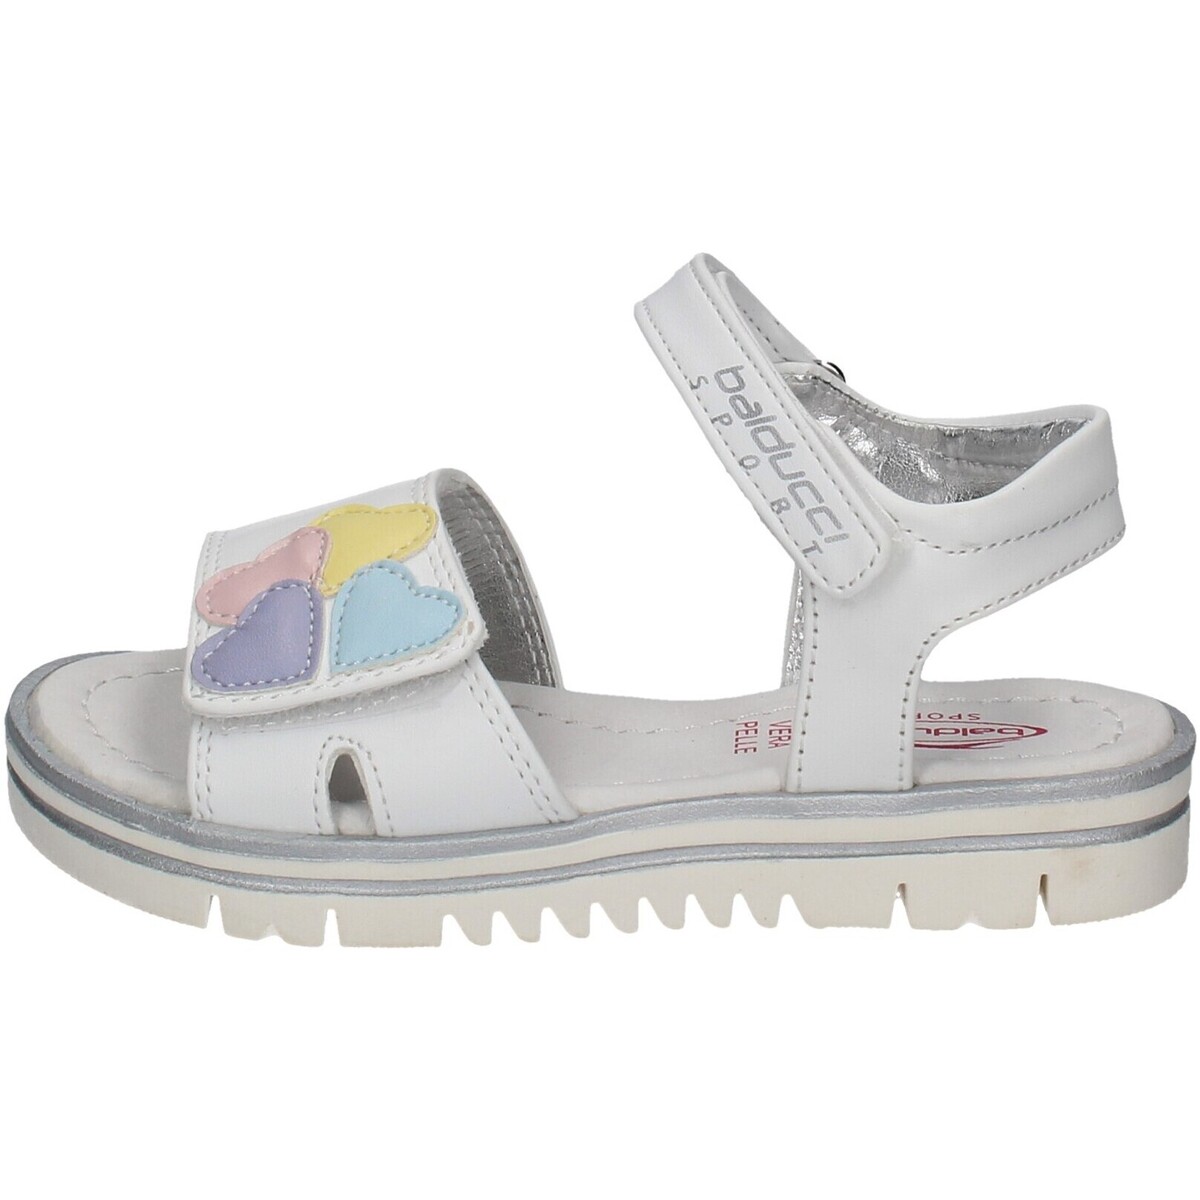 Chaussures Fille Dream in Green BS4431 Blanc